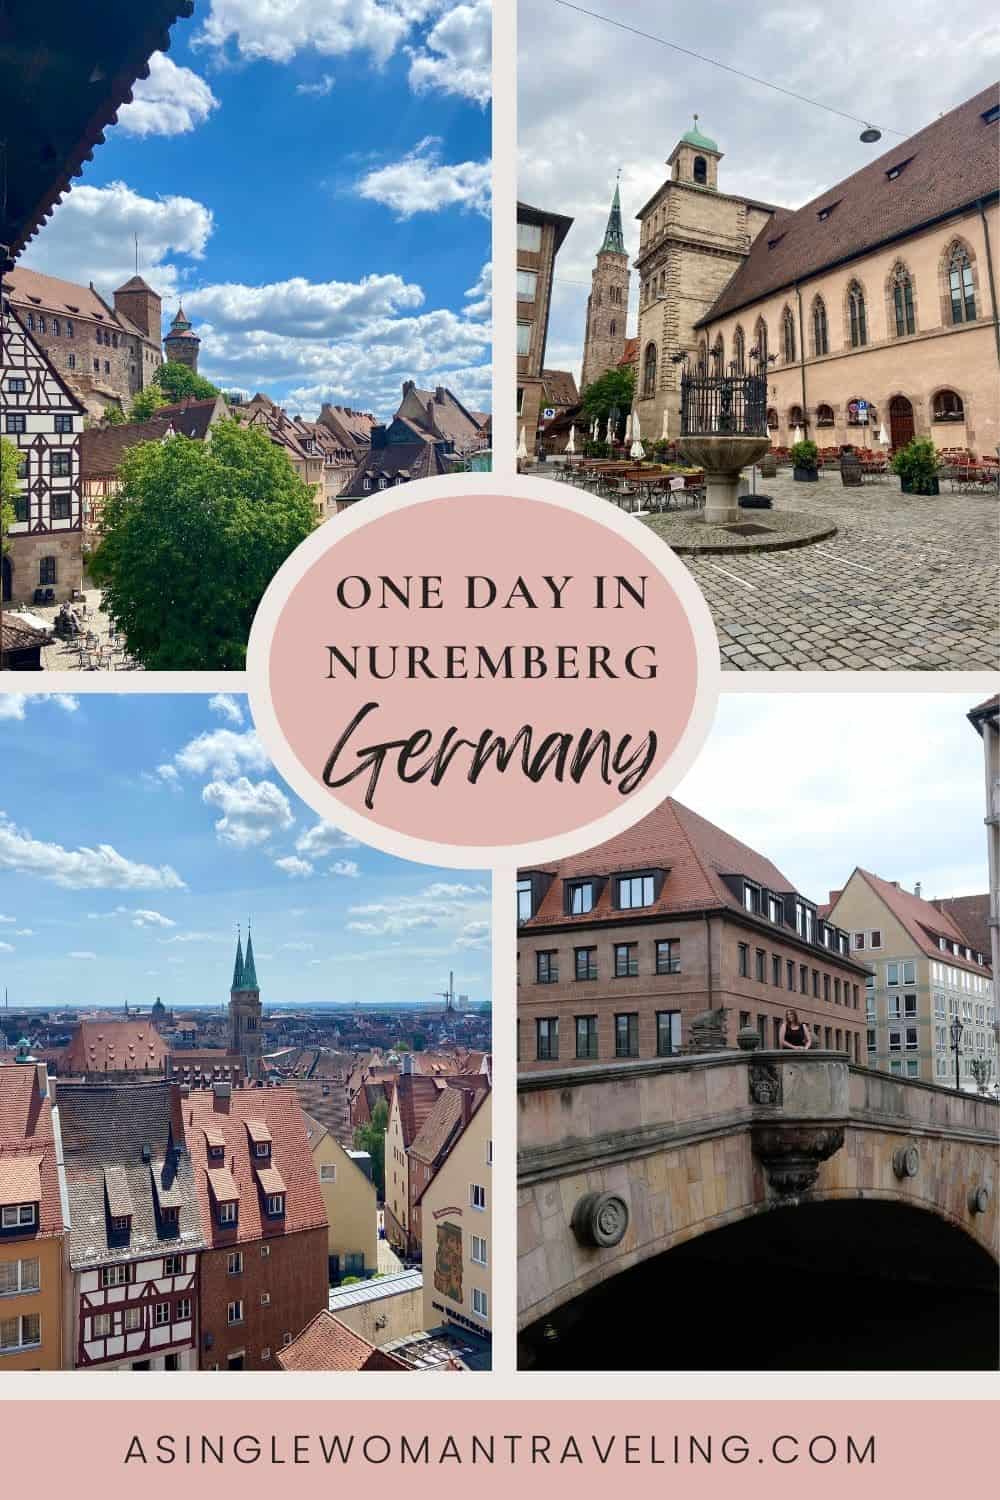 A visually appealing travel collage for 'ONE DAY IN NUREMBERG Germany', featuring a selection of images that showcase the city's historic architecture. Views include the towering Nuremberg Castle, a peaceful square with St. Sebaldus Church, the cityscape from above with its distinctive rooftops, and the classic stone bridge over the river.  a personal travel story or guide.